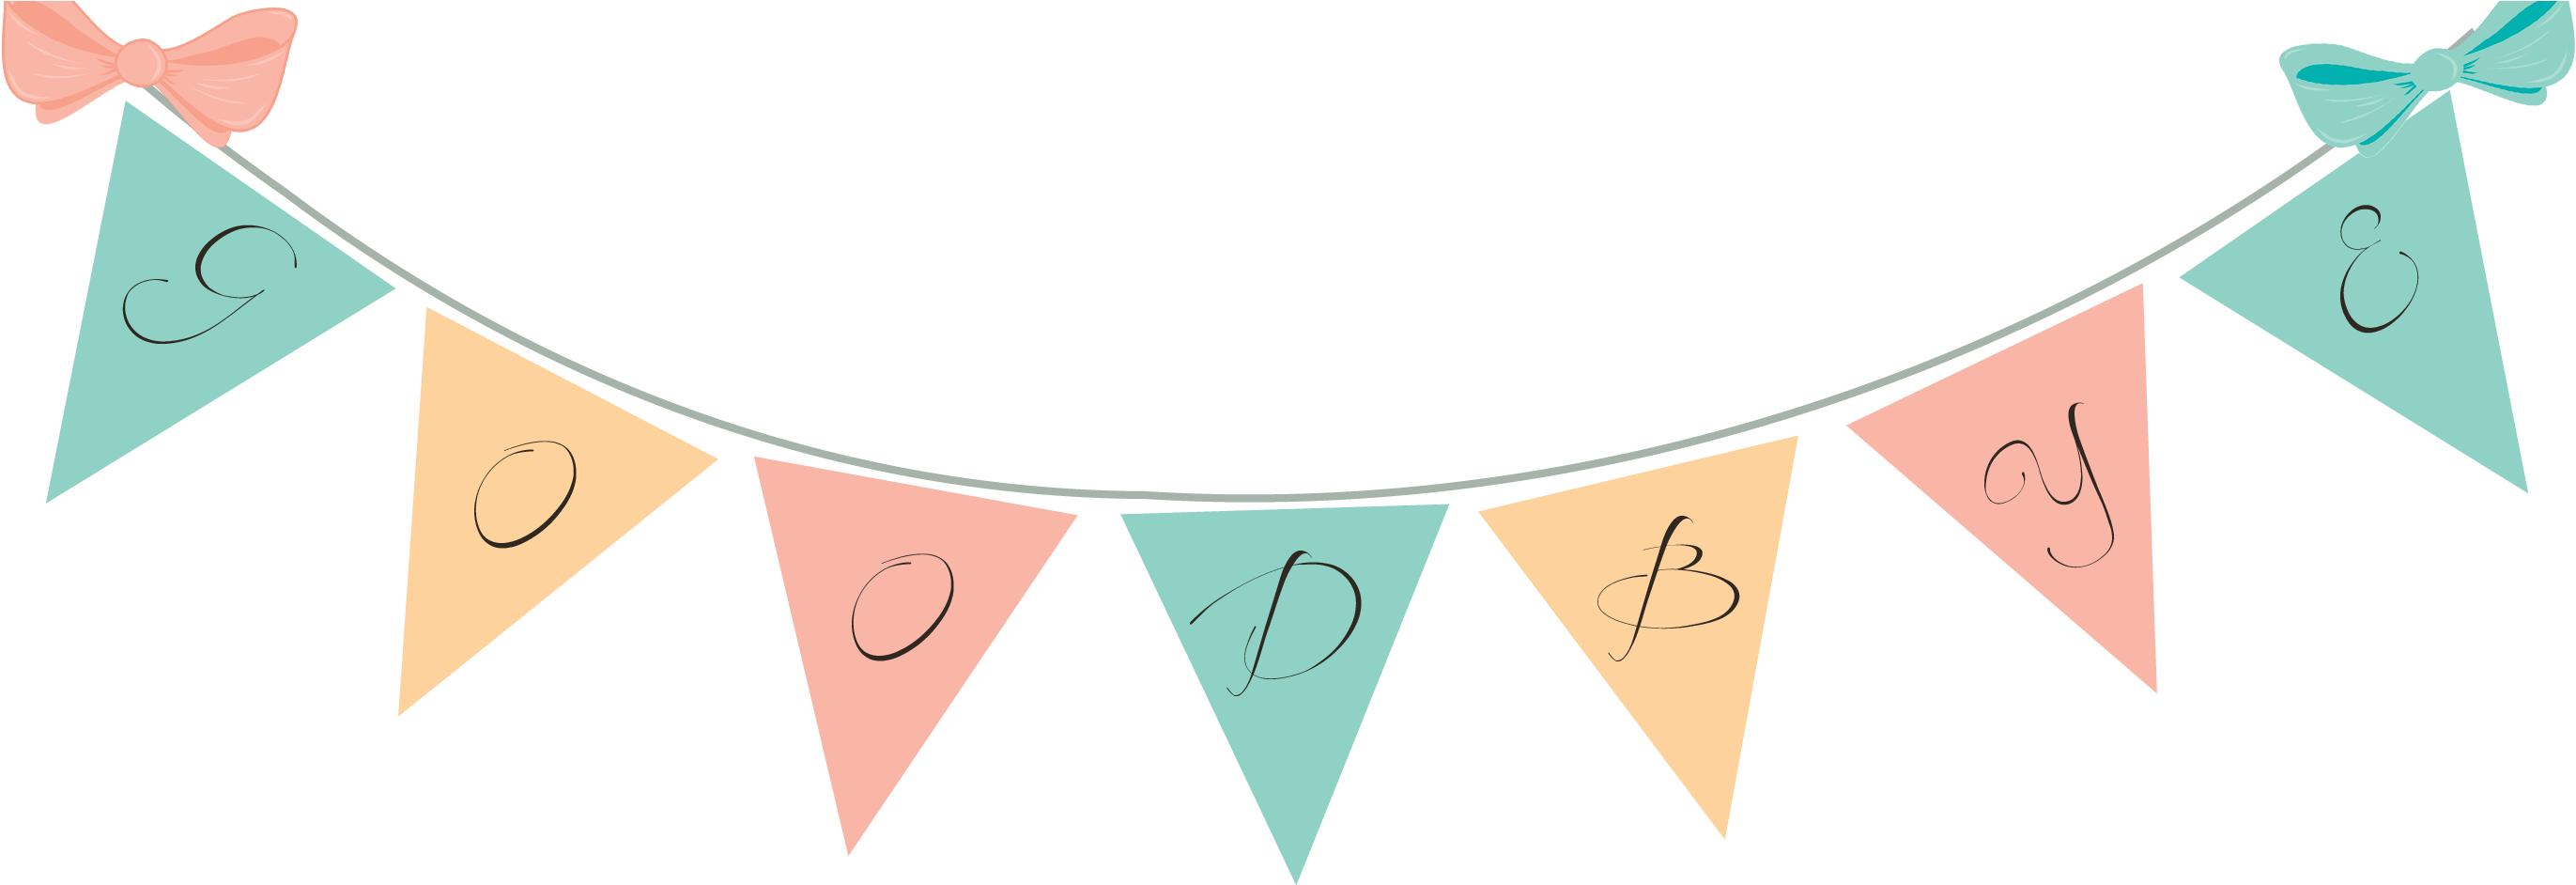 A Group Of Bunting Flags With Letters On Them